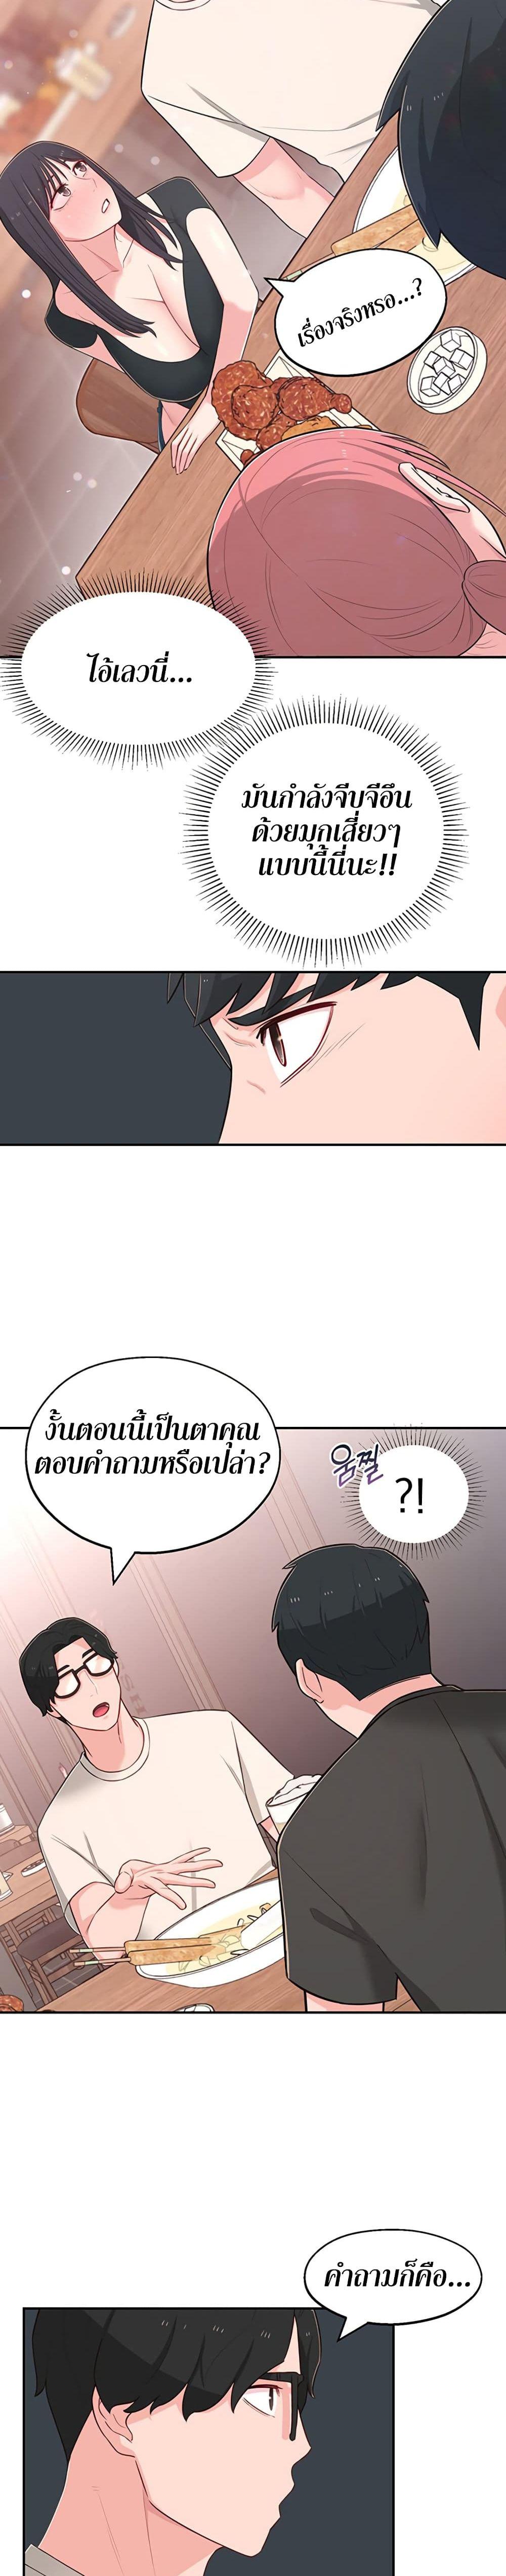 A Knowing Sister 13 ภาพ 22